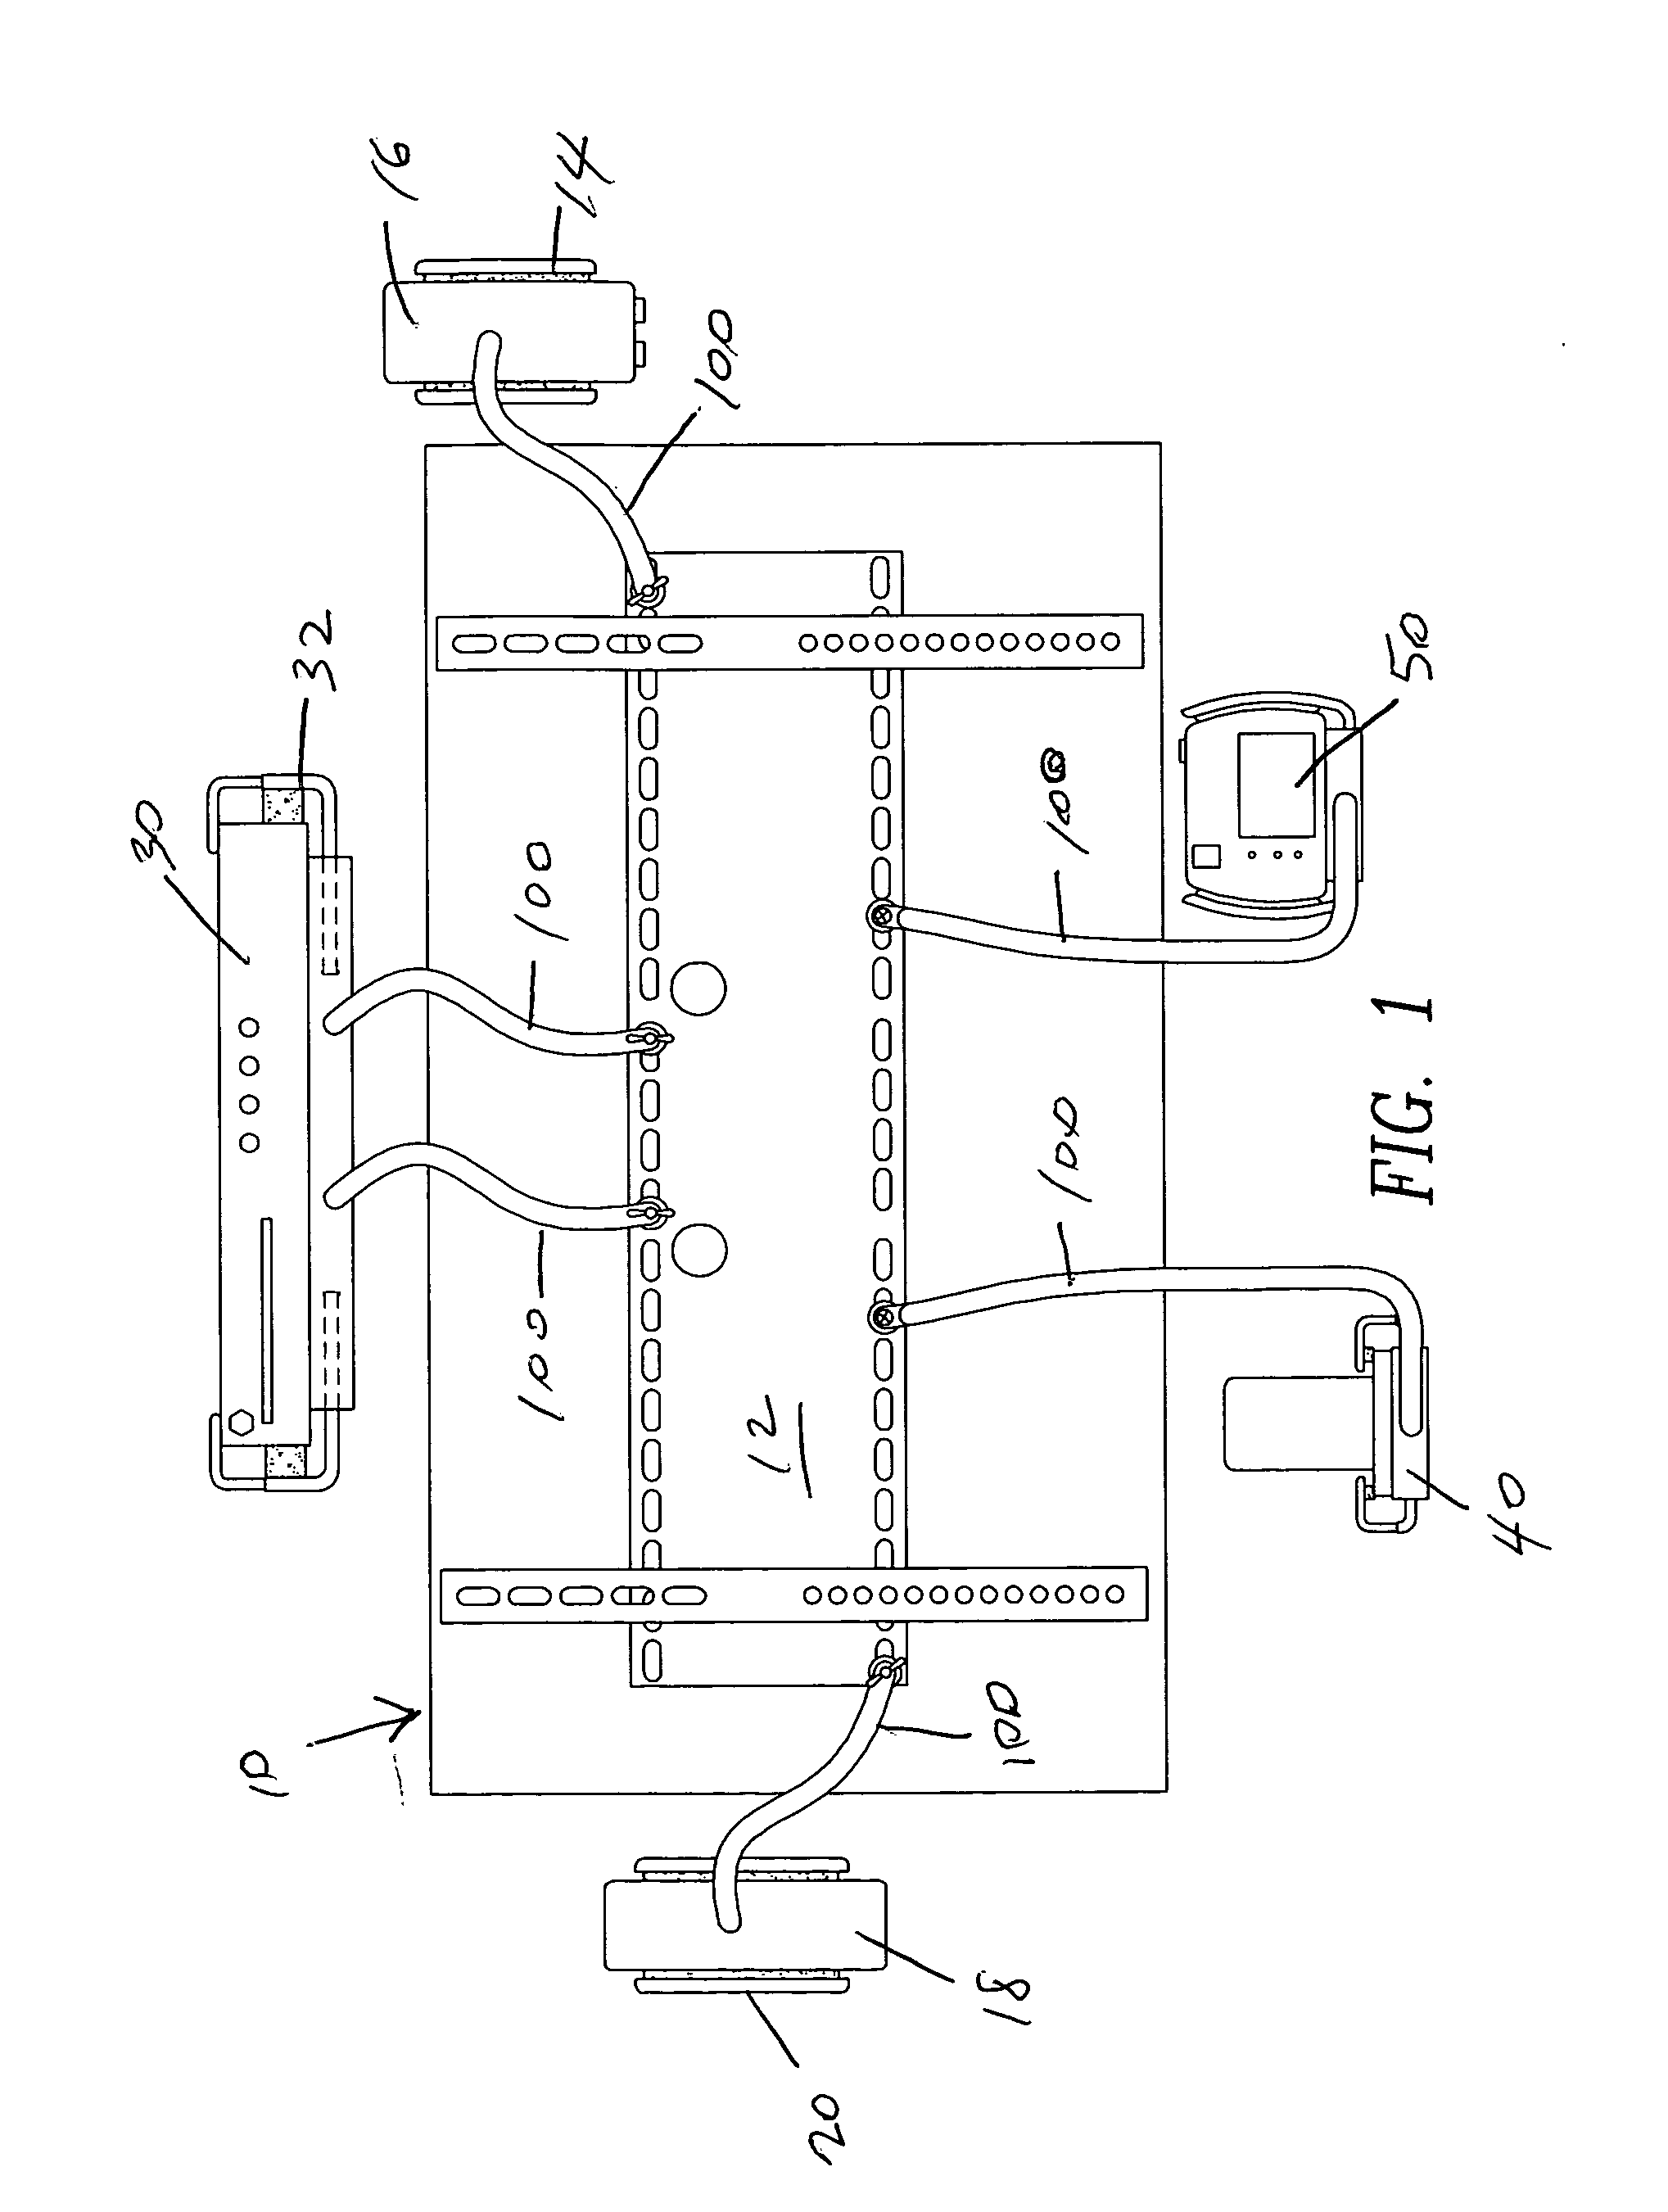 Universal holder and flexible member for mounting, holding, and adjustably positioning electronic products and accessories